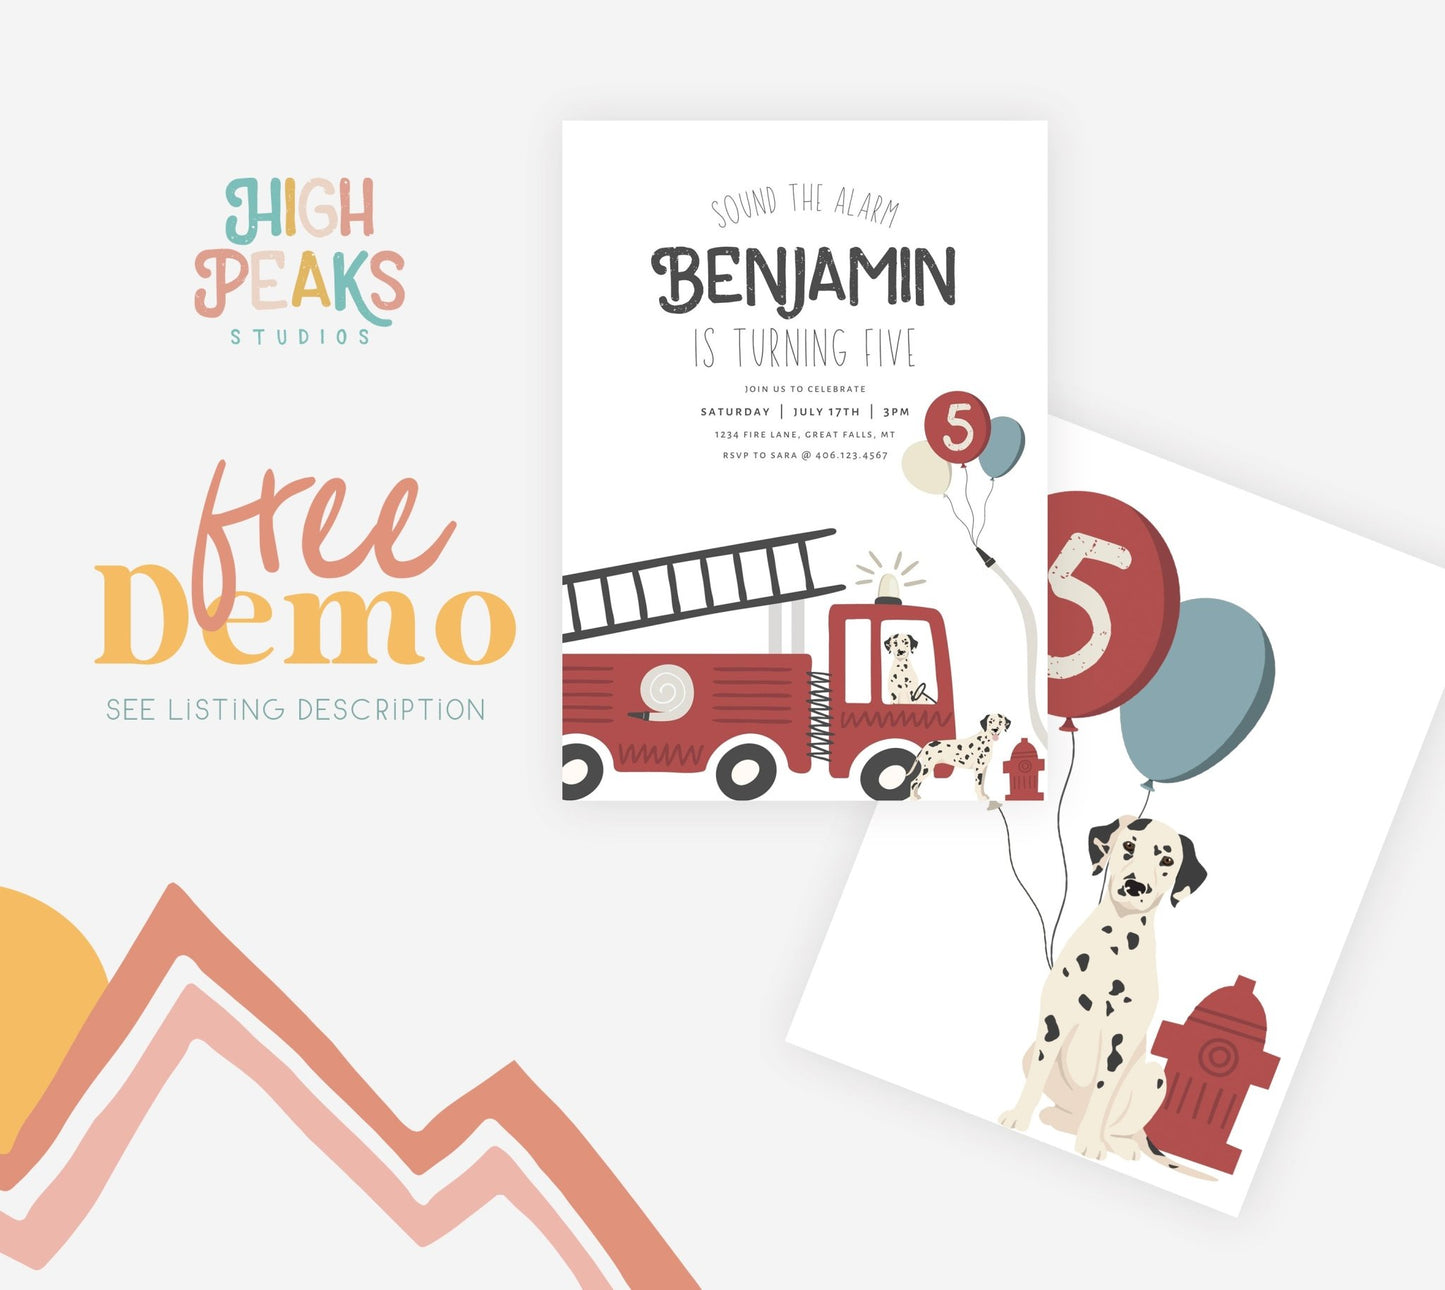 Fire Truck Party Invitation Printable Template - Any Age - High Peaks Studios